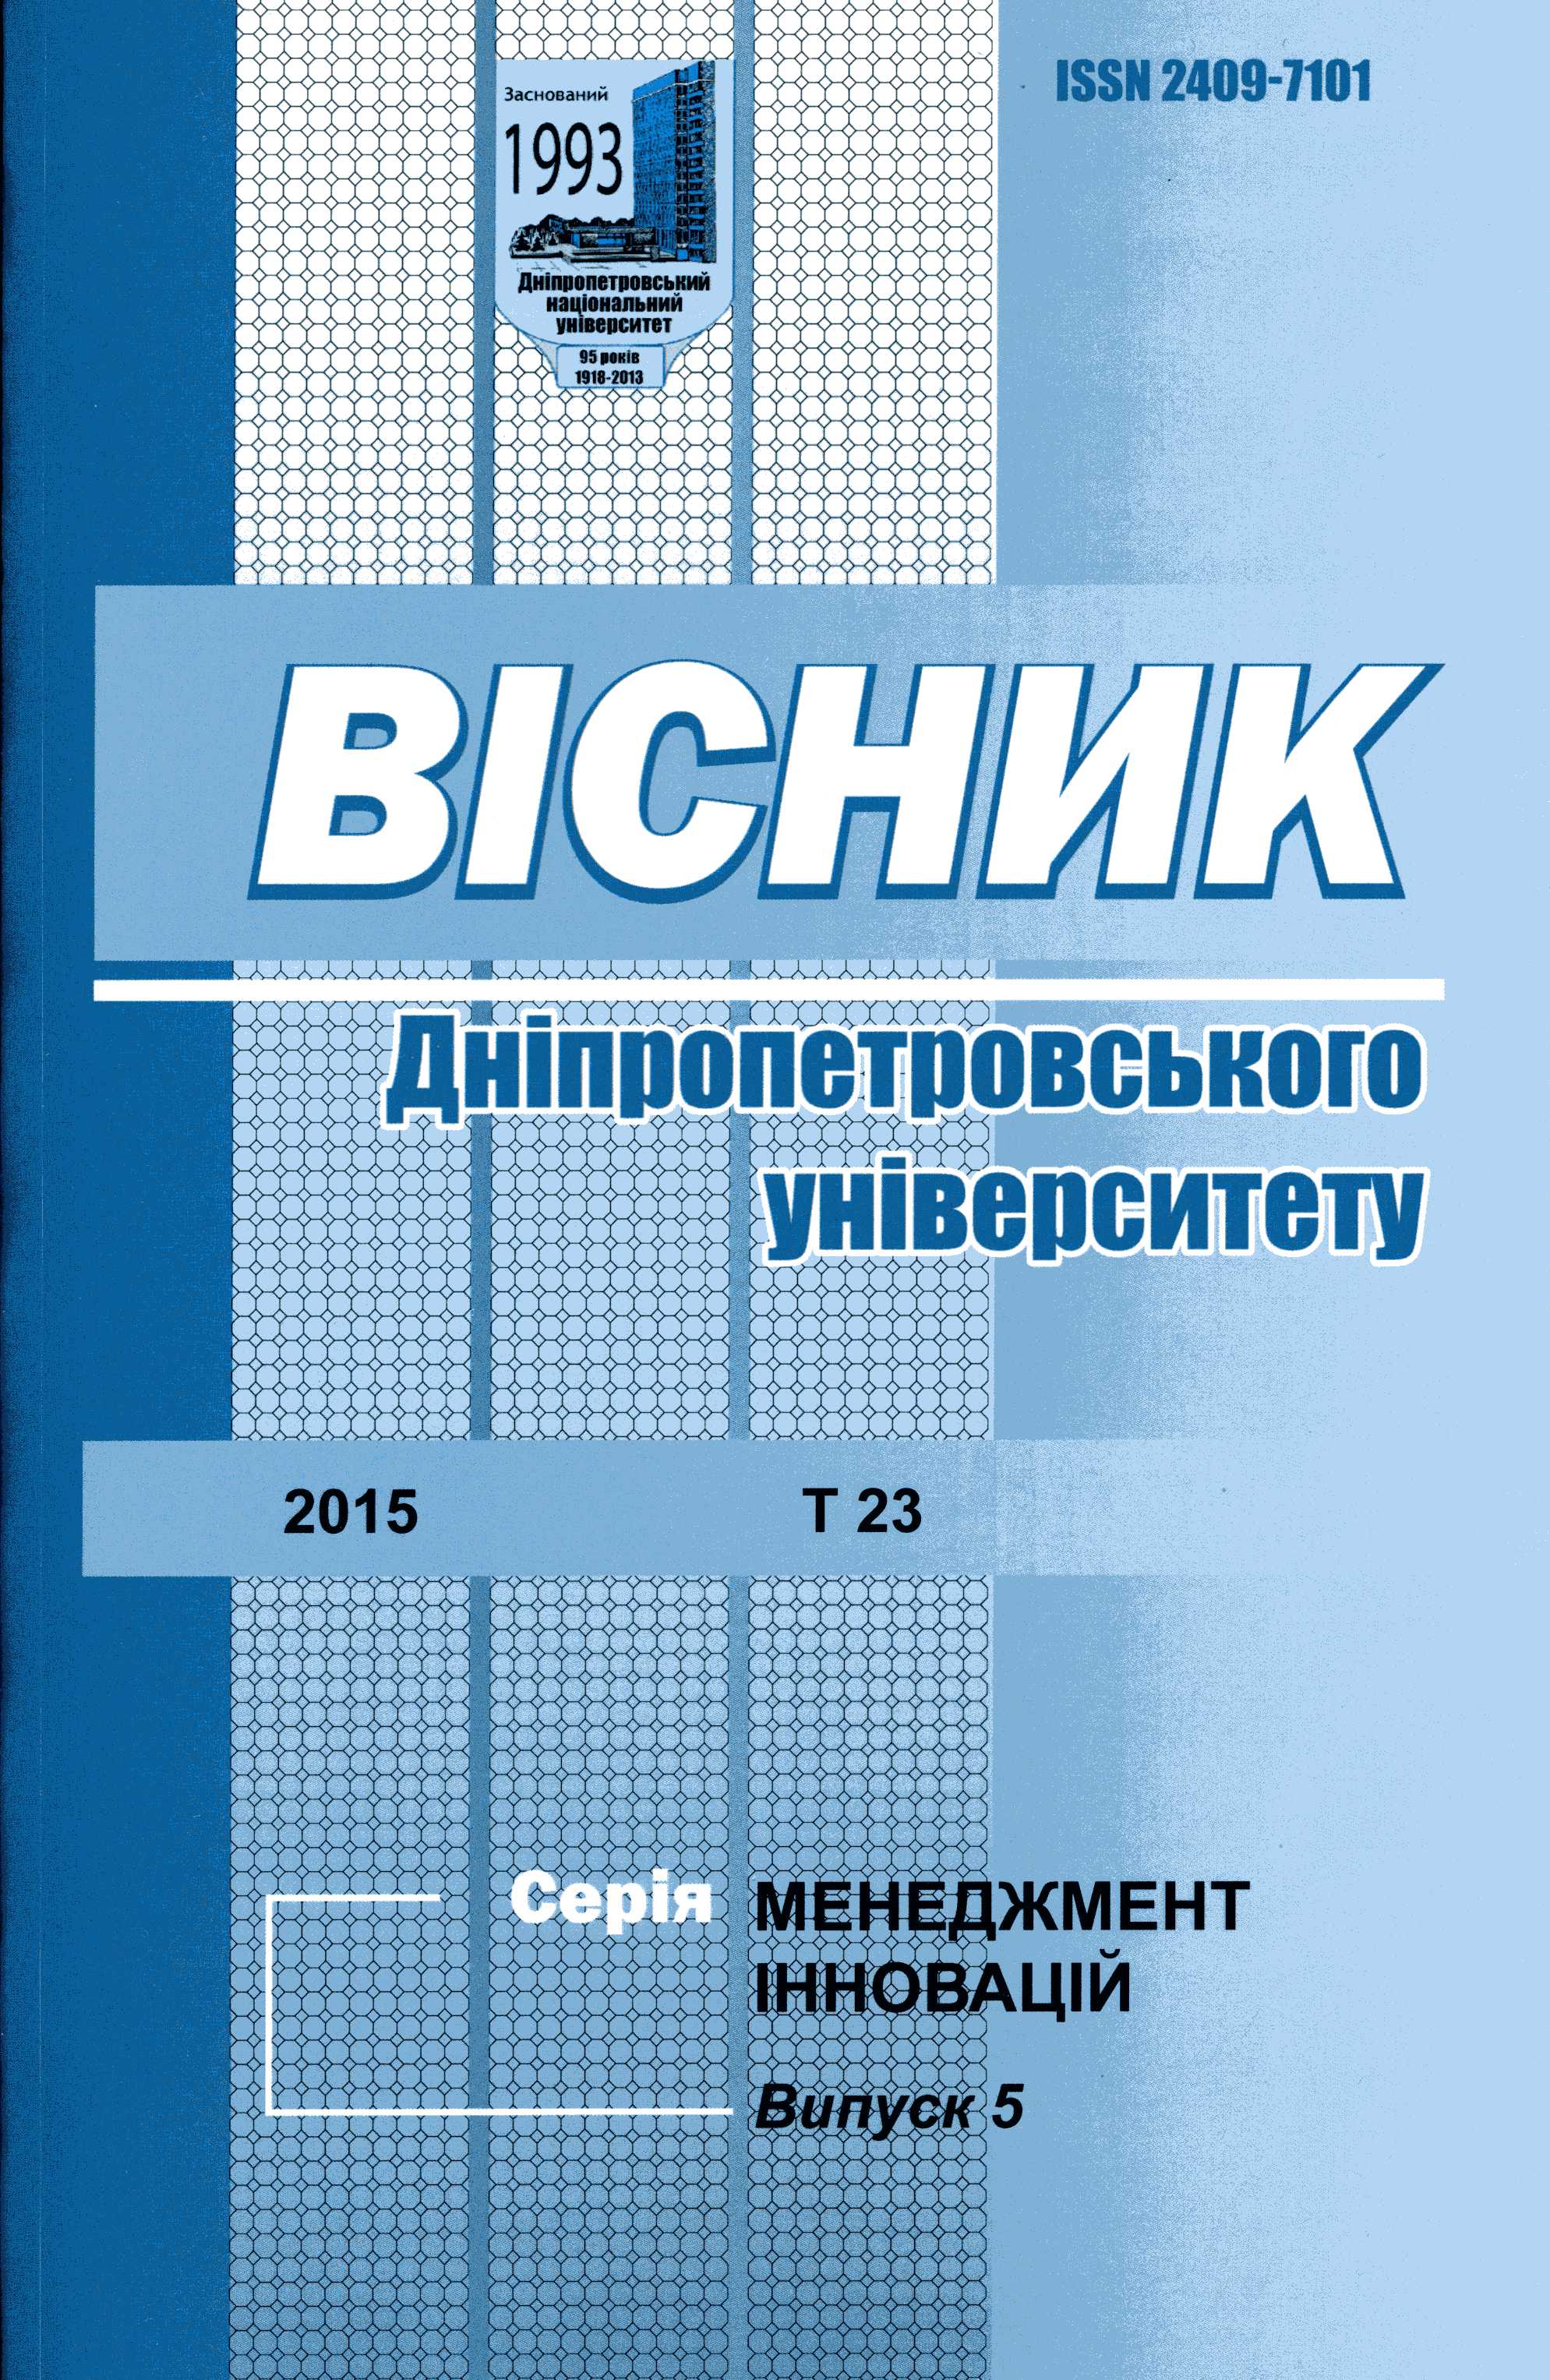 Development of IT outsourcing in Ukraine Cover Image